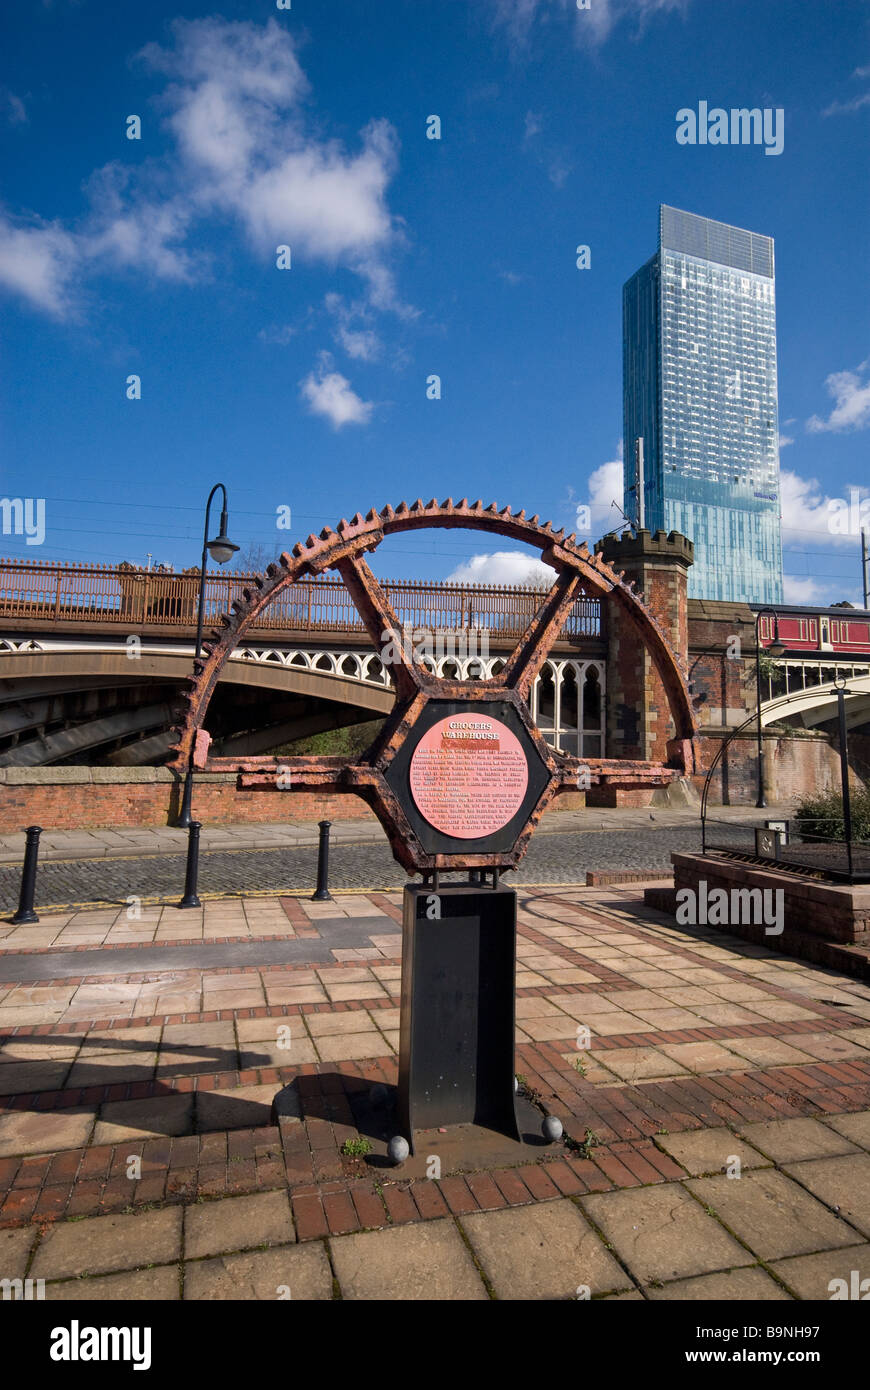 Castlefield Industrial Heritage area Manchester Stock Photo